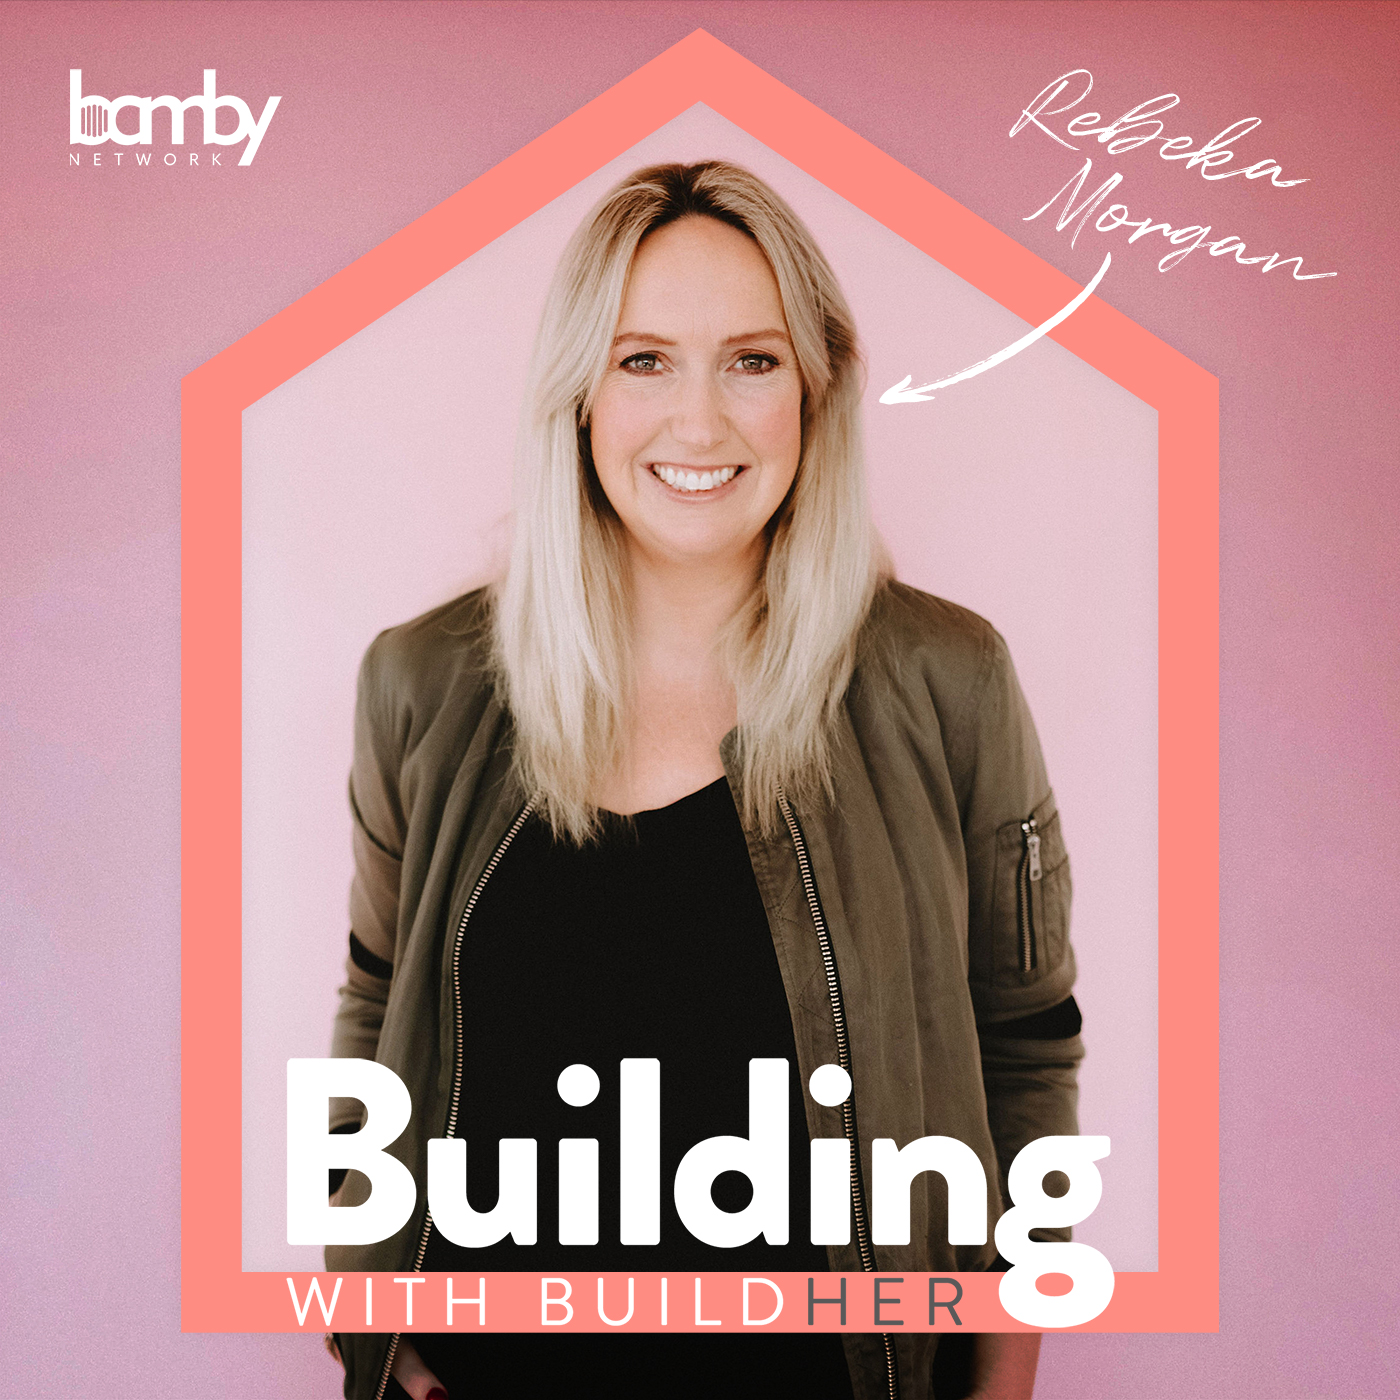 Designing high-value, small footprint sustainable homes with Architect Jessica Murray